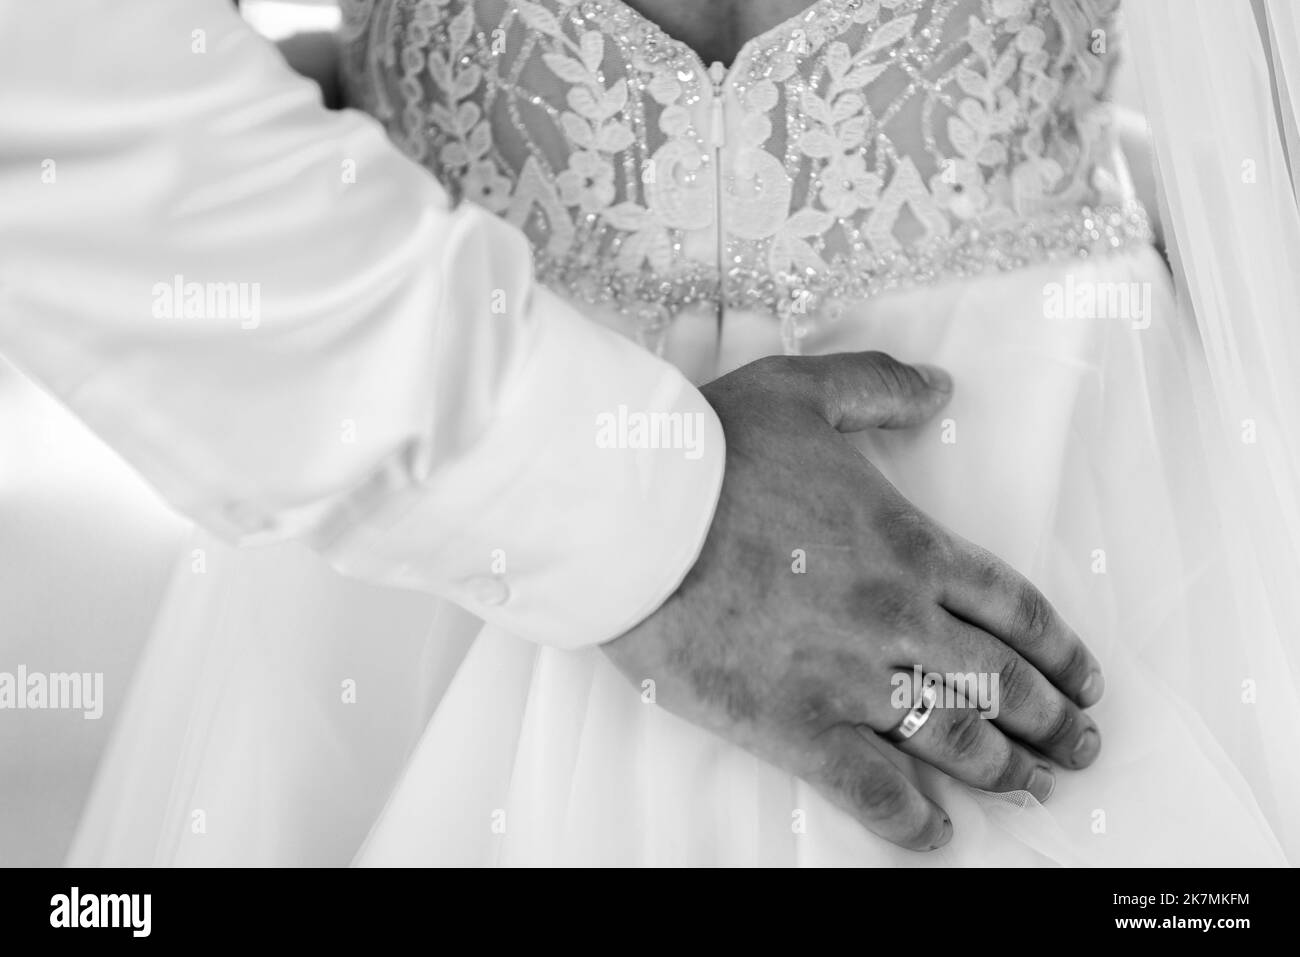 Bridal morning, bride wears dress. Groom helping fiancee to get dressed, adjusting buttons on wedding gown, rear view. close-up, crop Stock Photo